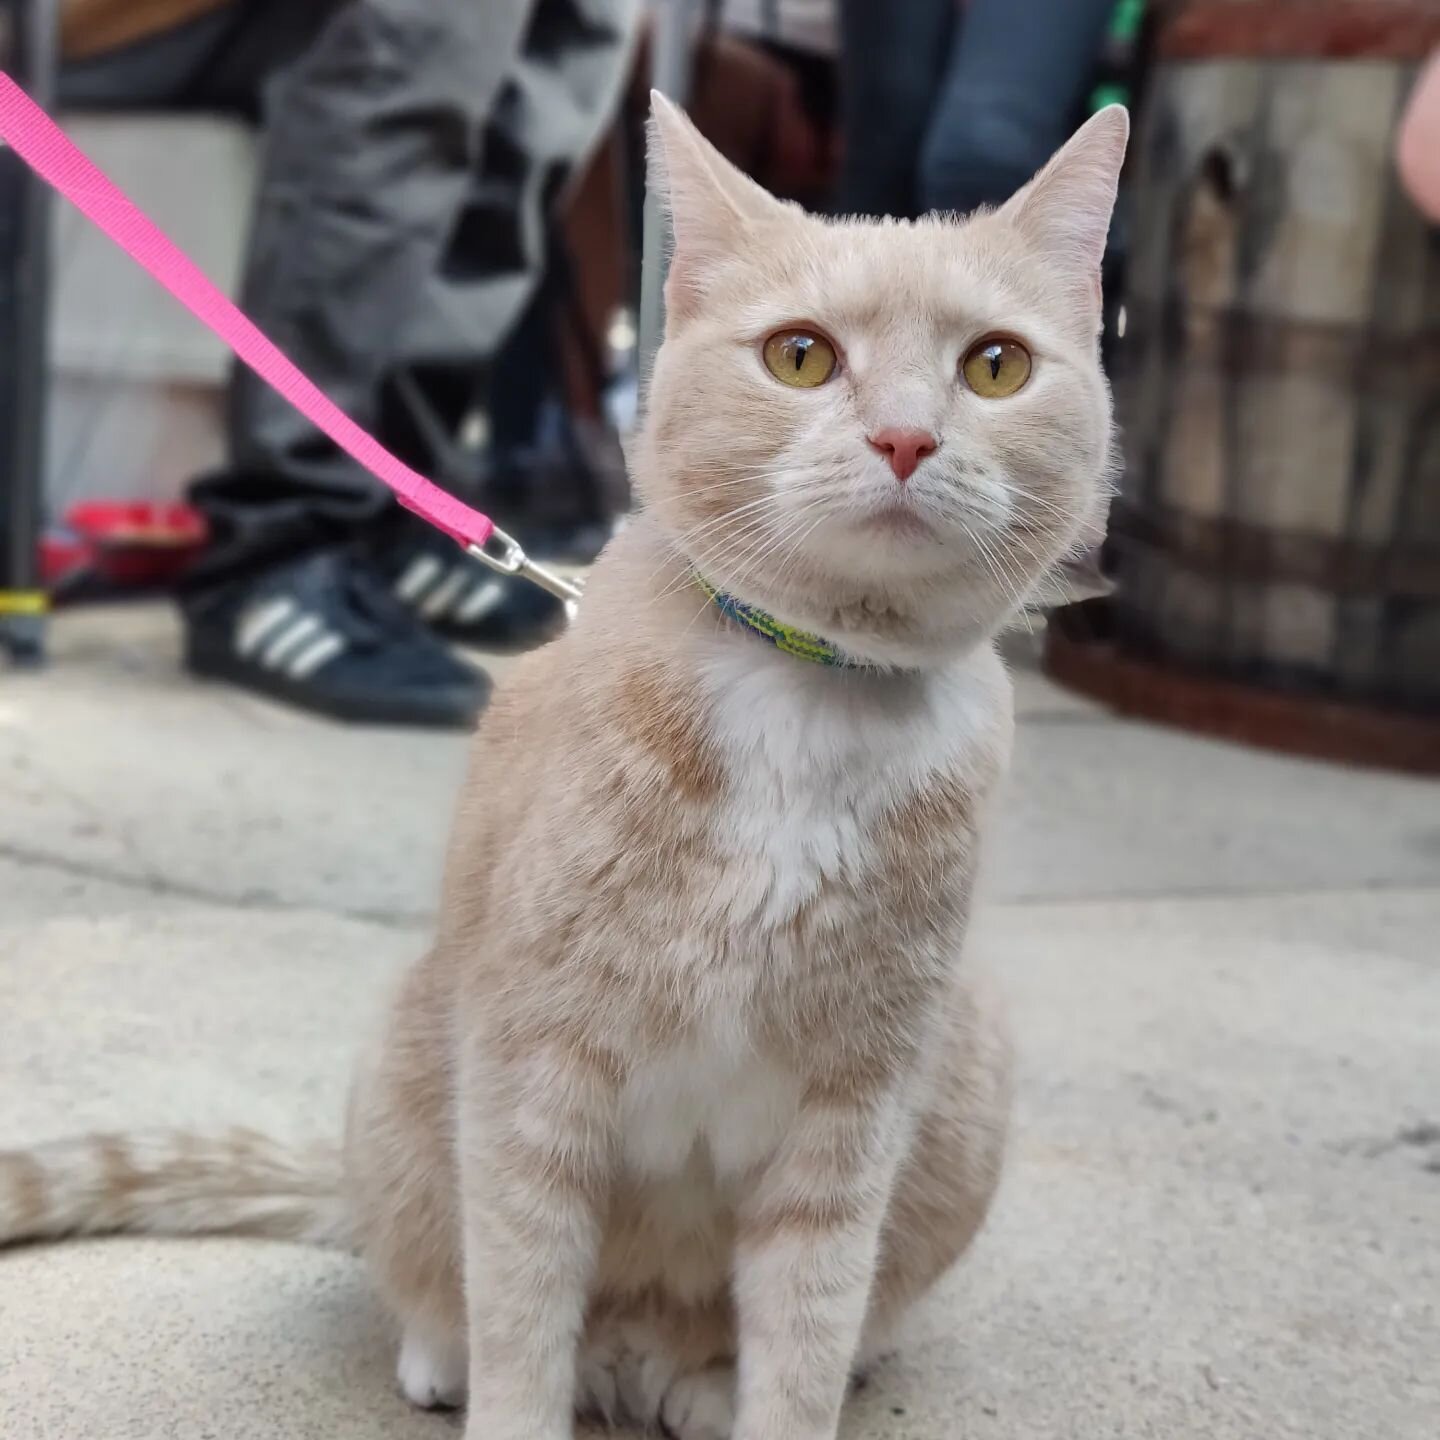 You have one more day to make yourself a mother, adopt a cat today 

Specifically you should adopt Chi-Chi, she is still looking for her forever home! She's very sweet in the mornings and on slow days and she is the sweetest to her favorite people. W